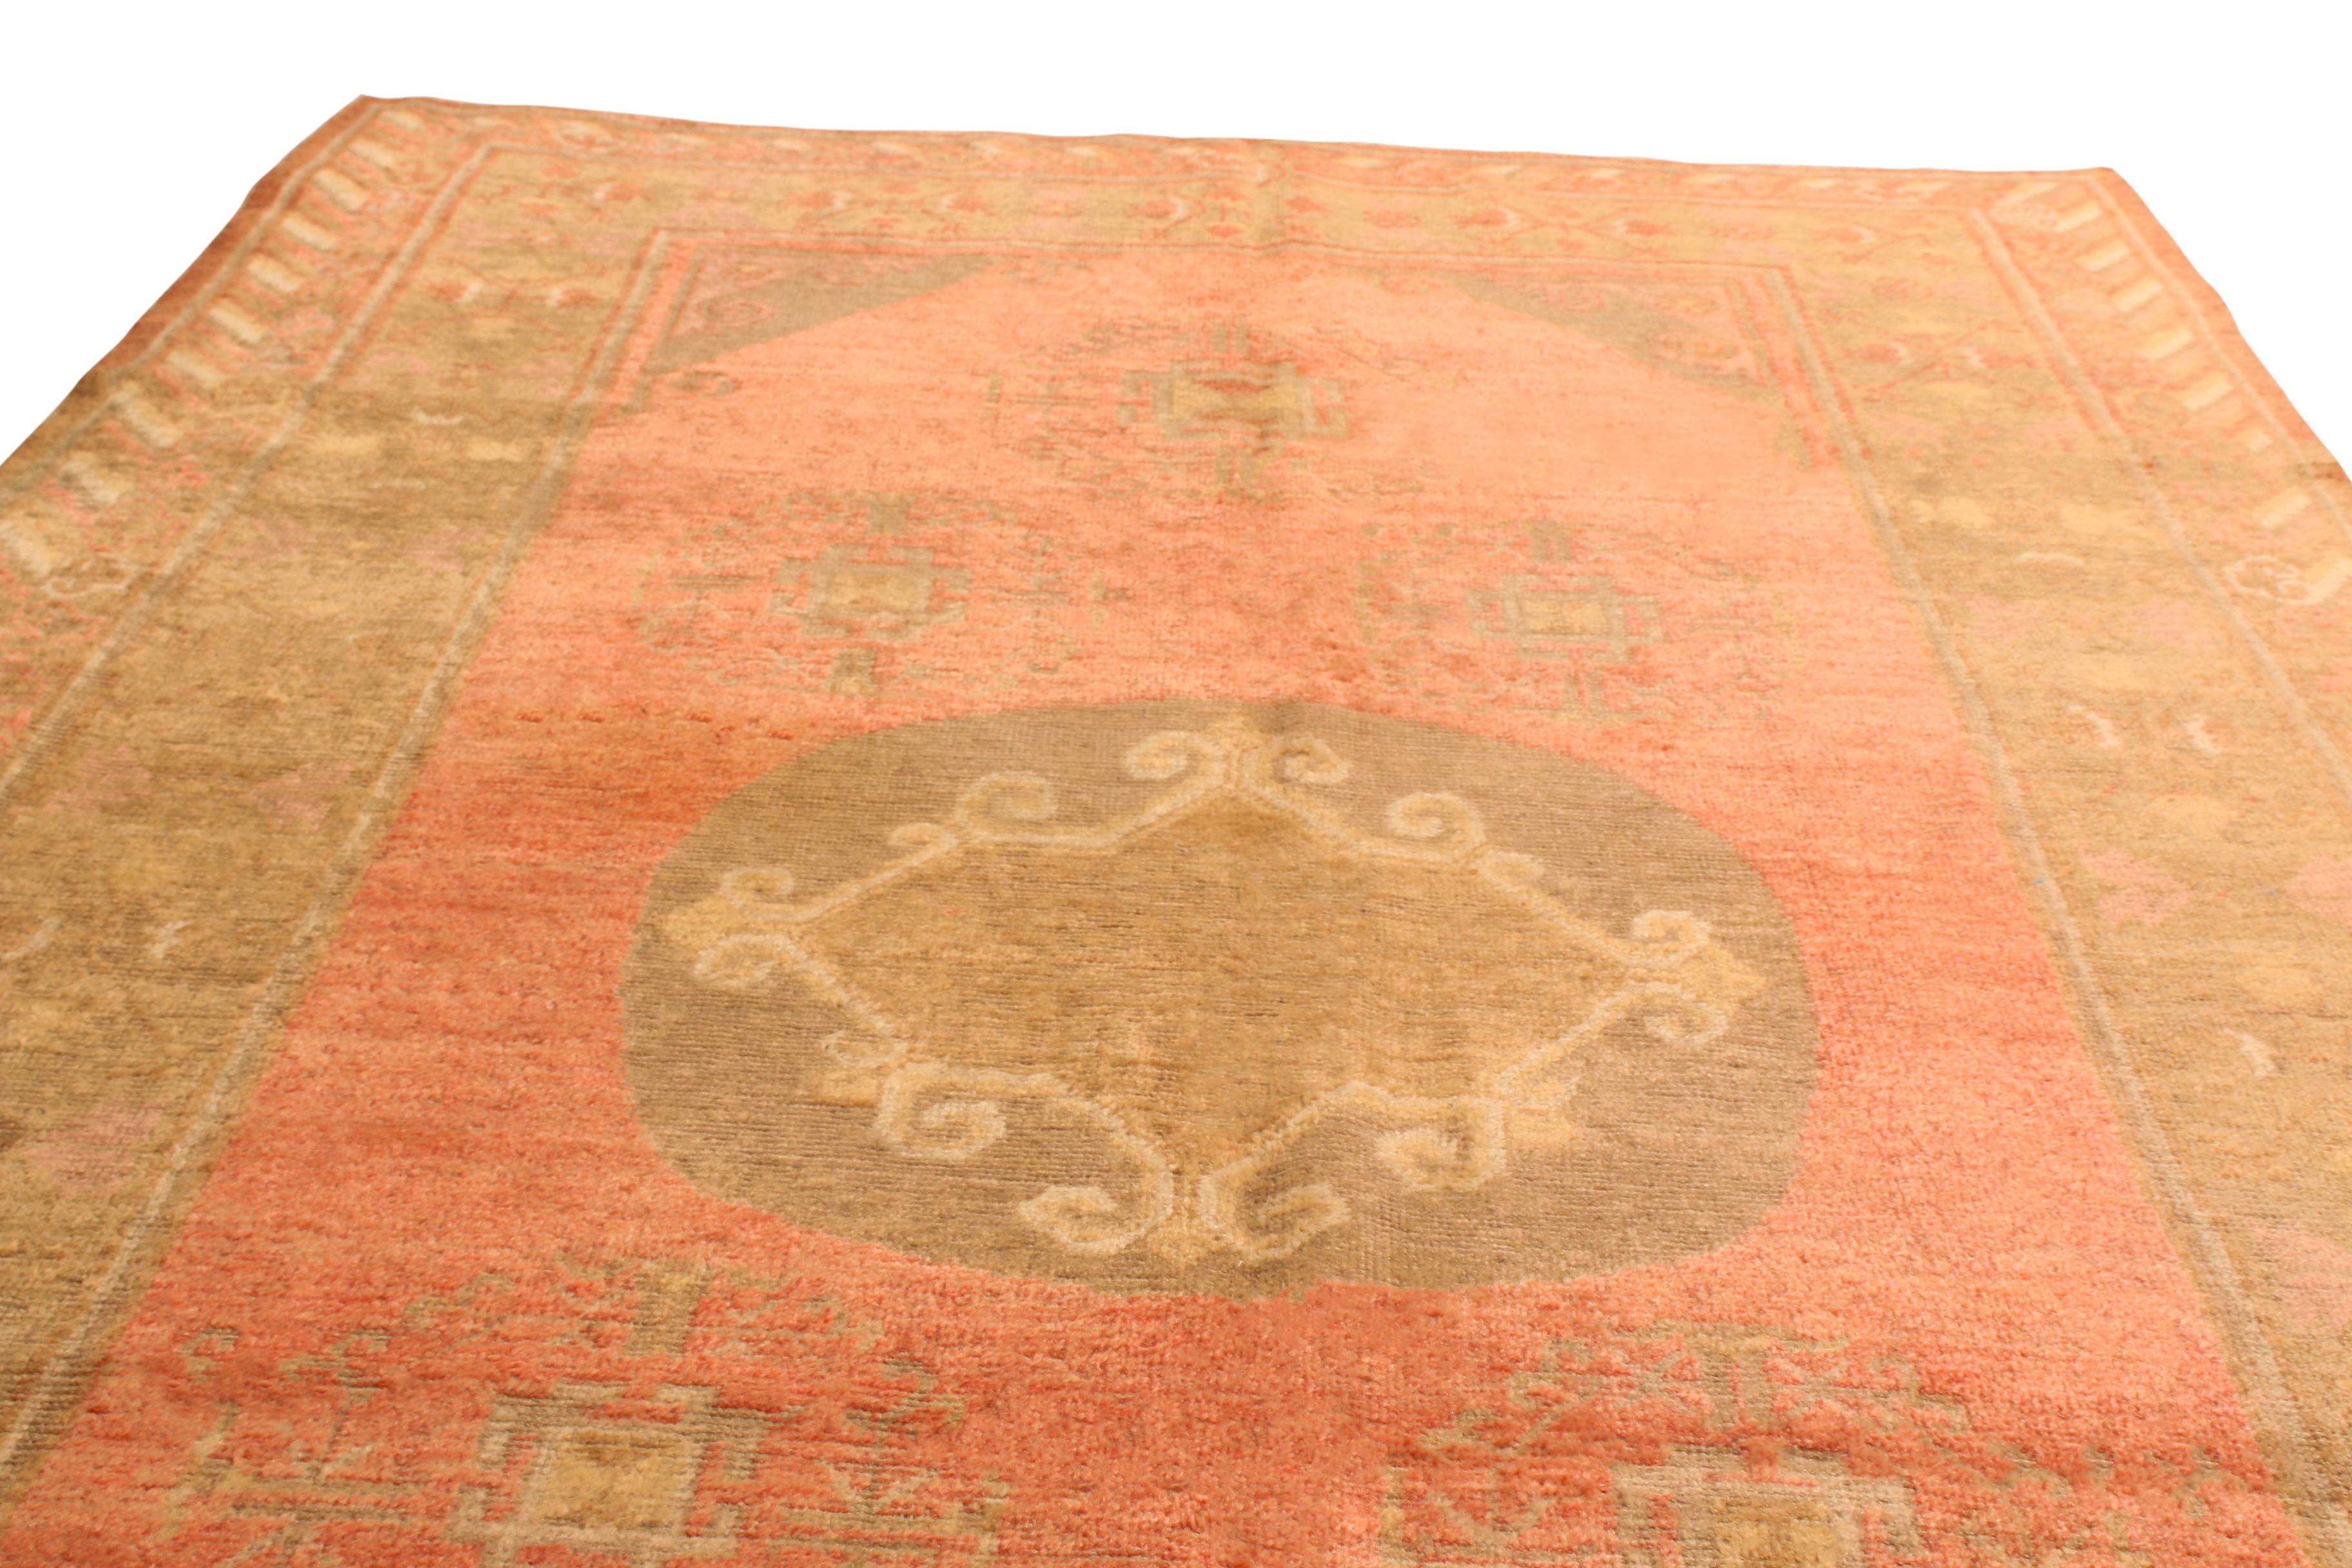 Originating from East Turkestan between 1920-1940, this antique transitional Khotan rug from Rug & Kilim has several uniquely subtle influences on its design. As Khotan rugs are known for their individuality from piece to piece, this rug’s lack of